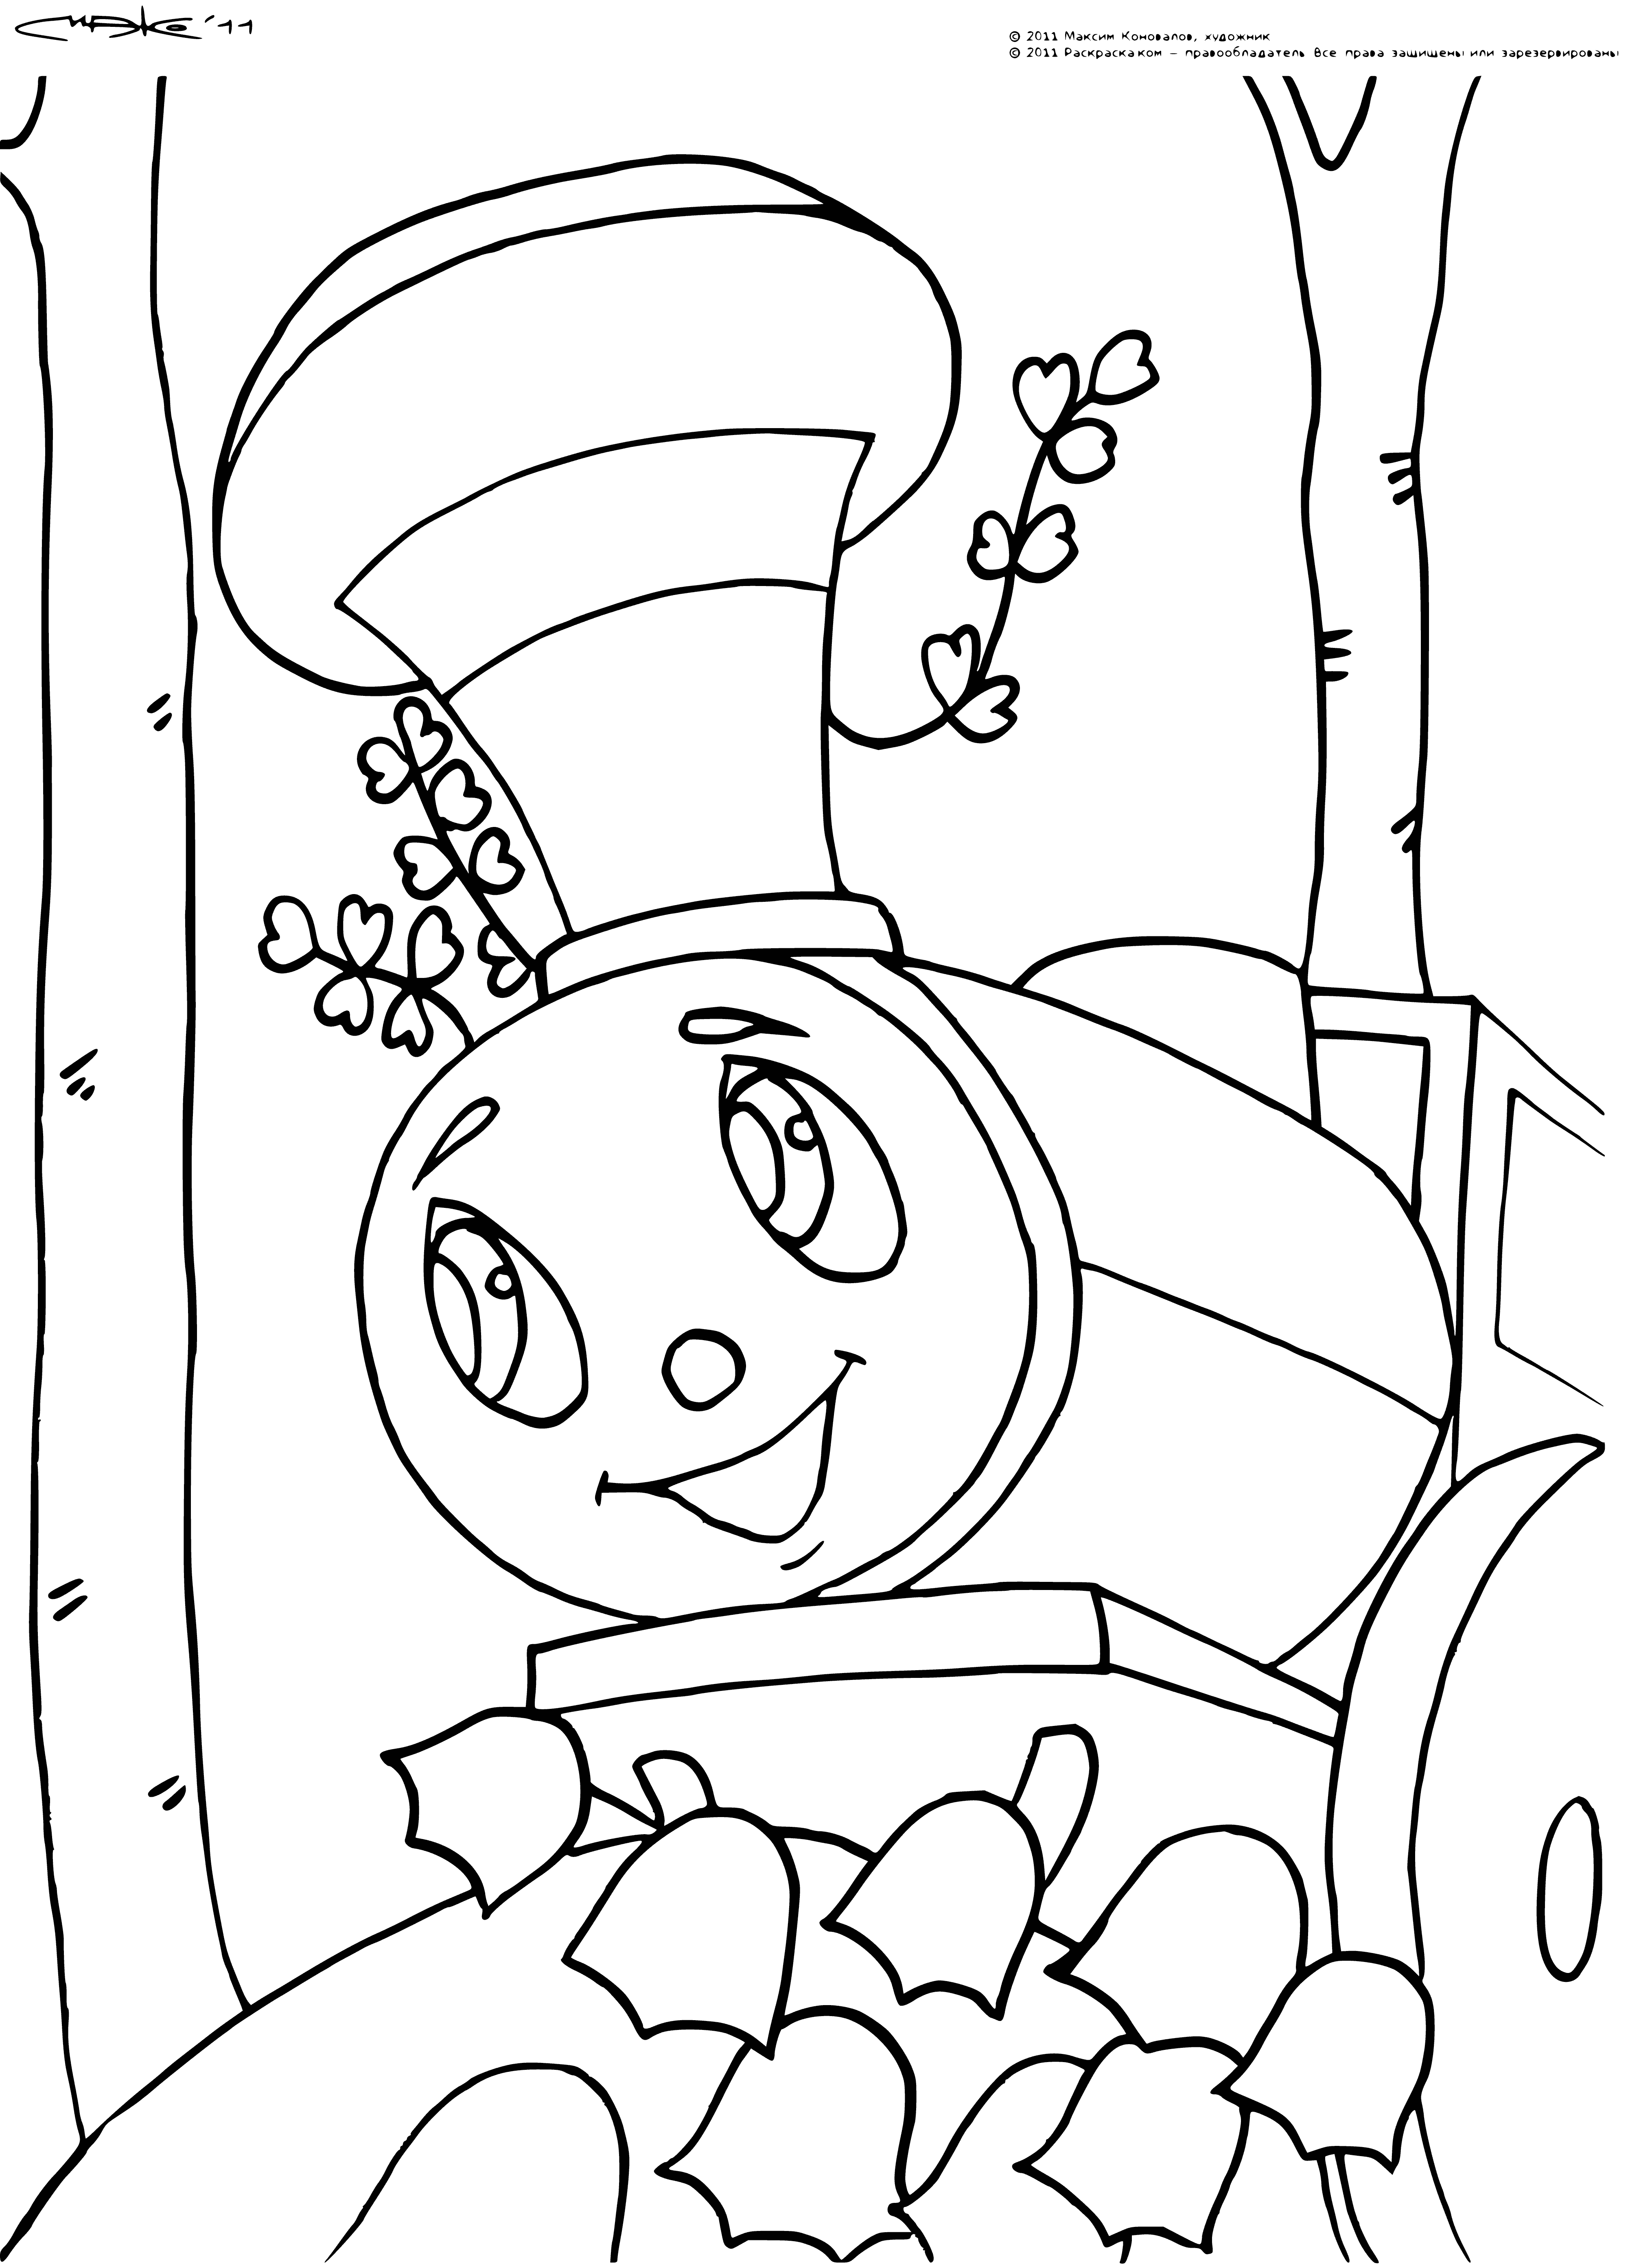 coloring page: Locomotive seen in Moscow's Romashkovo station: steam engine, pulling passenger & freight cars, painted black & "Romashkovo" written on it in white.